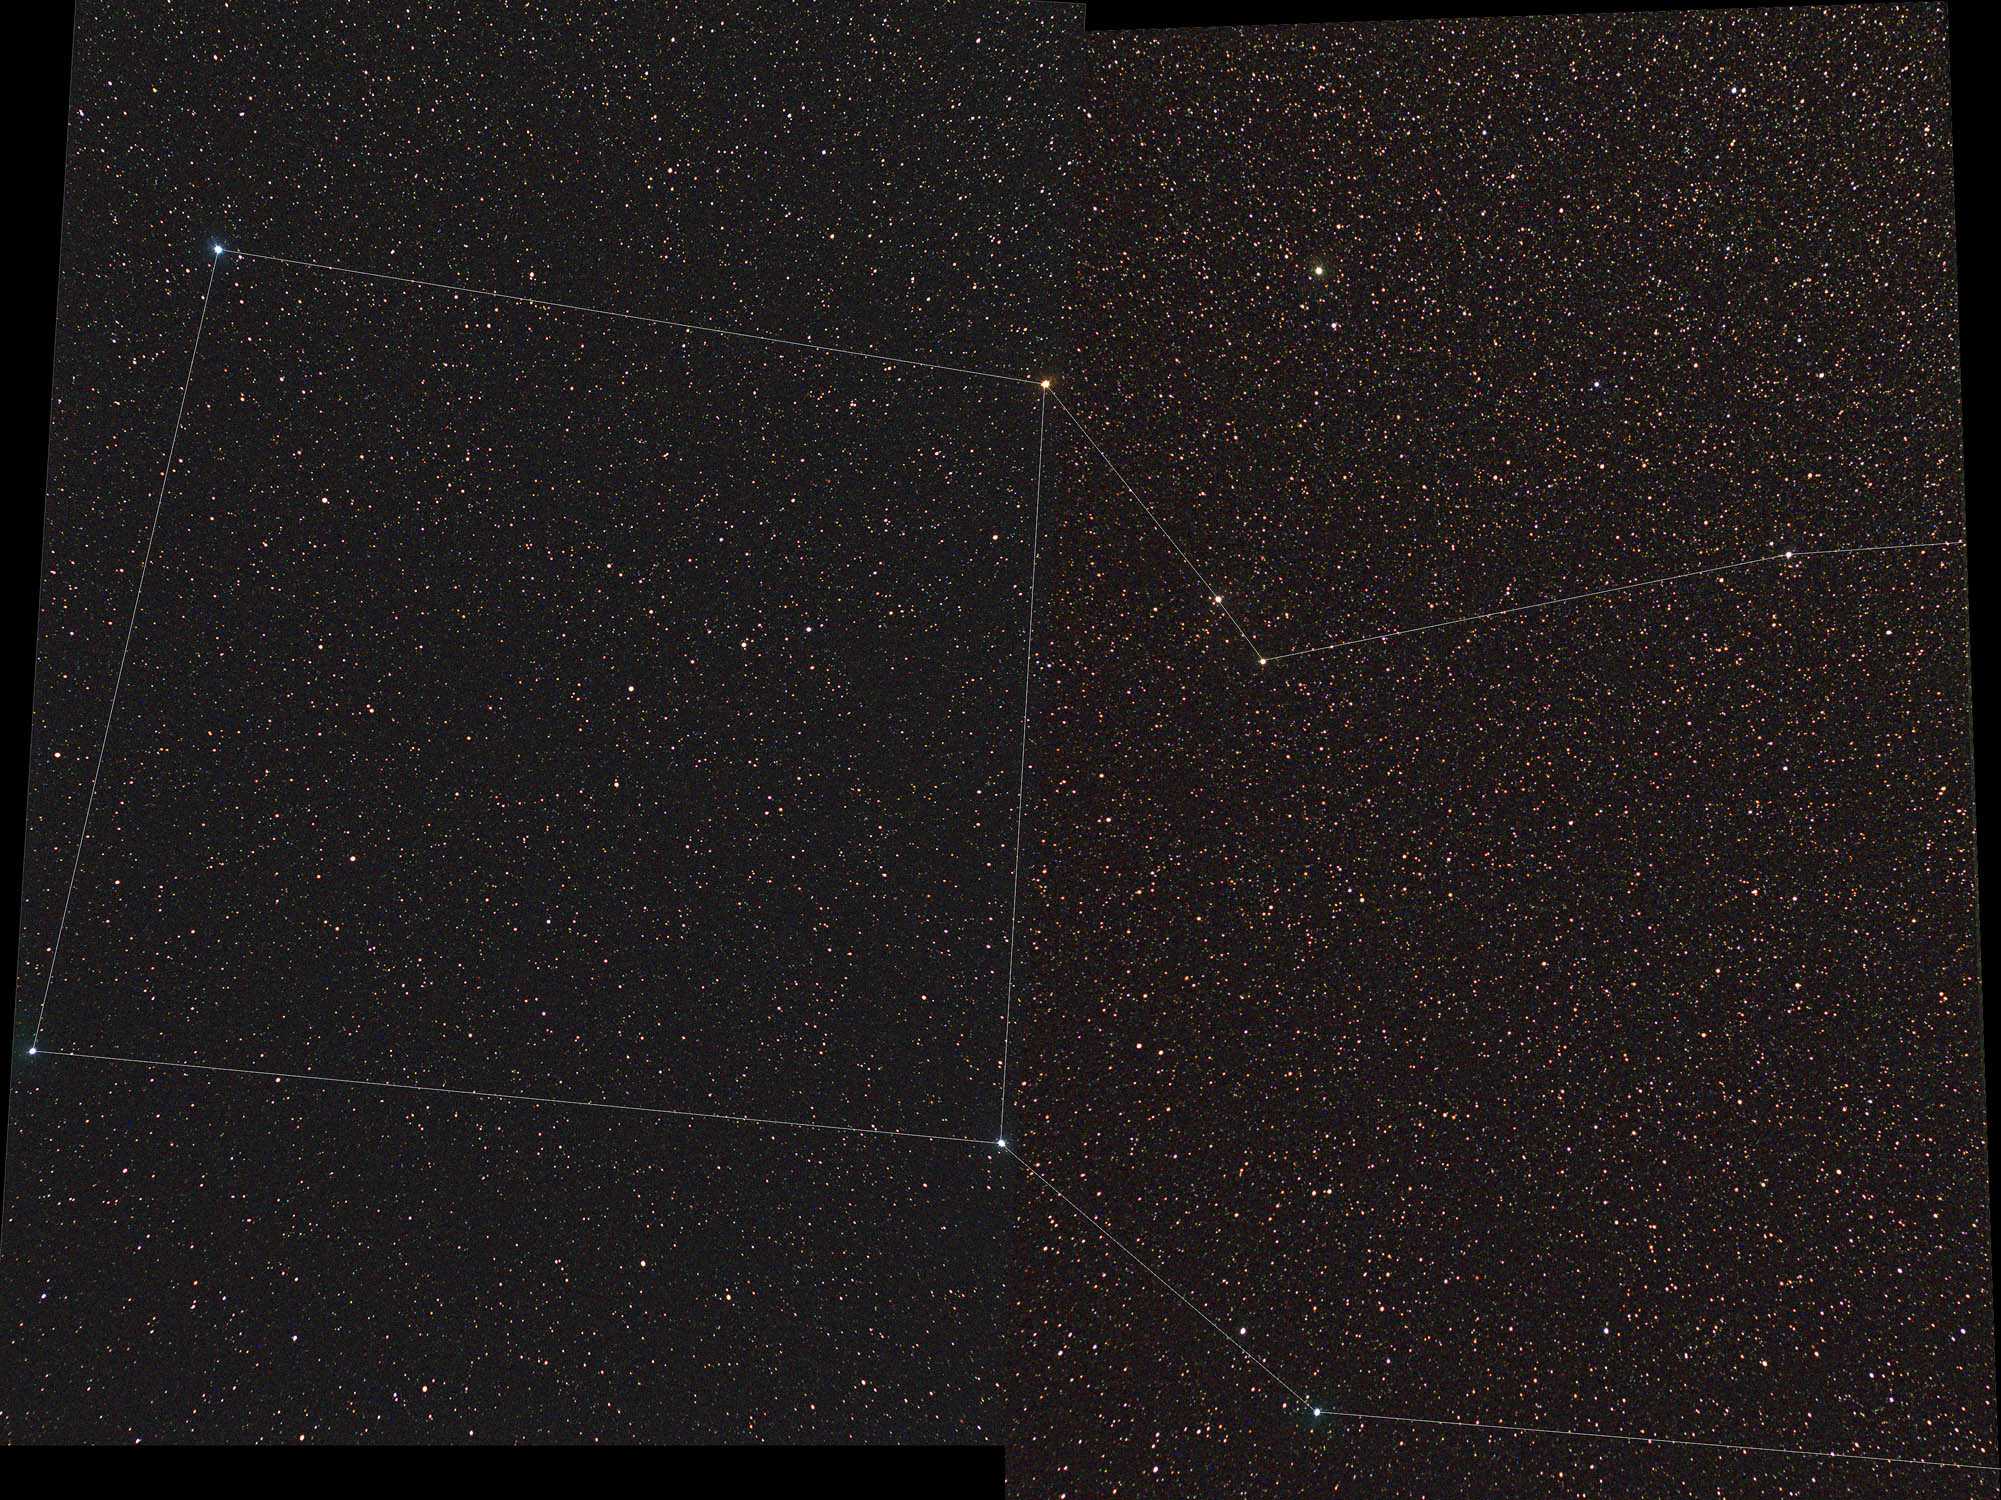 Pegasus constellation: 457 KB; click on the image to enlarge